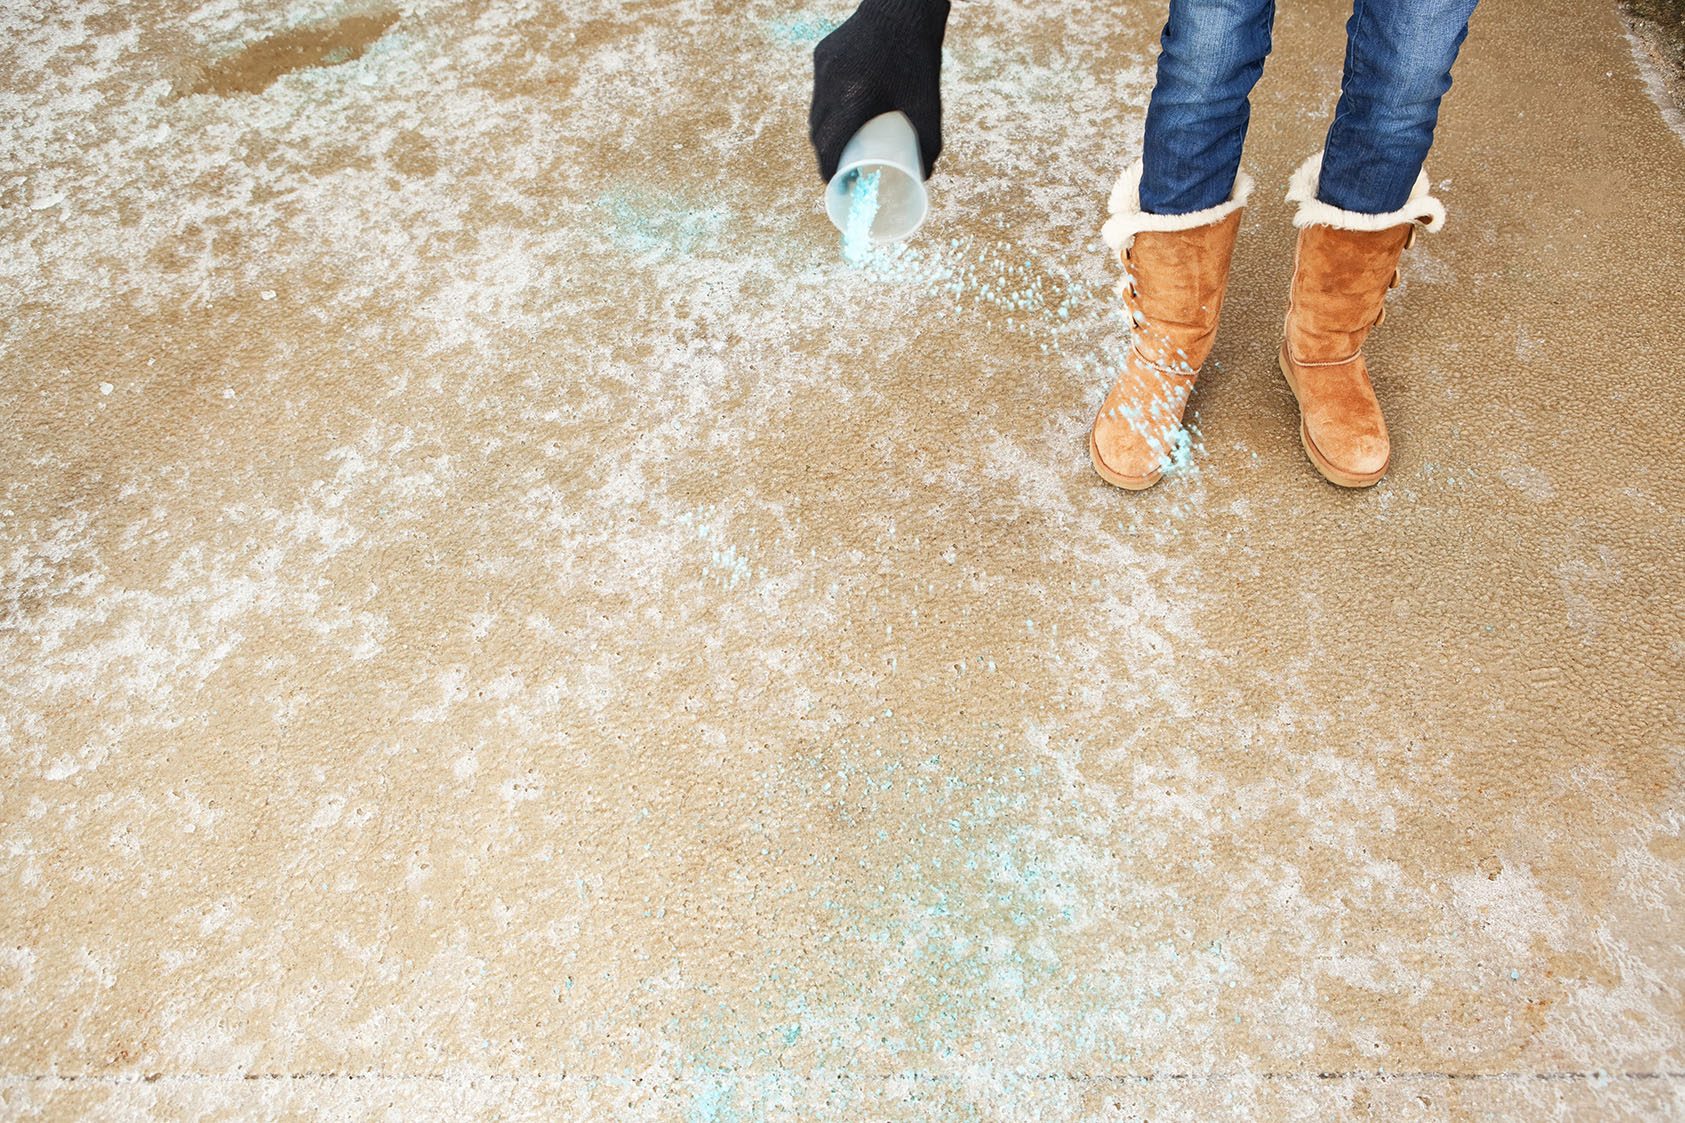 Ice Melt vs. Rock Salt - What's the Difference? 